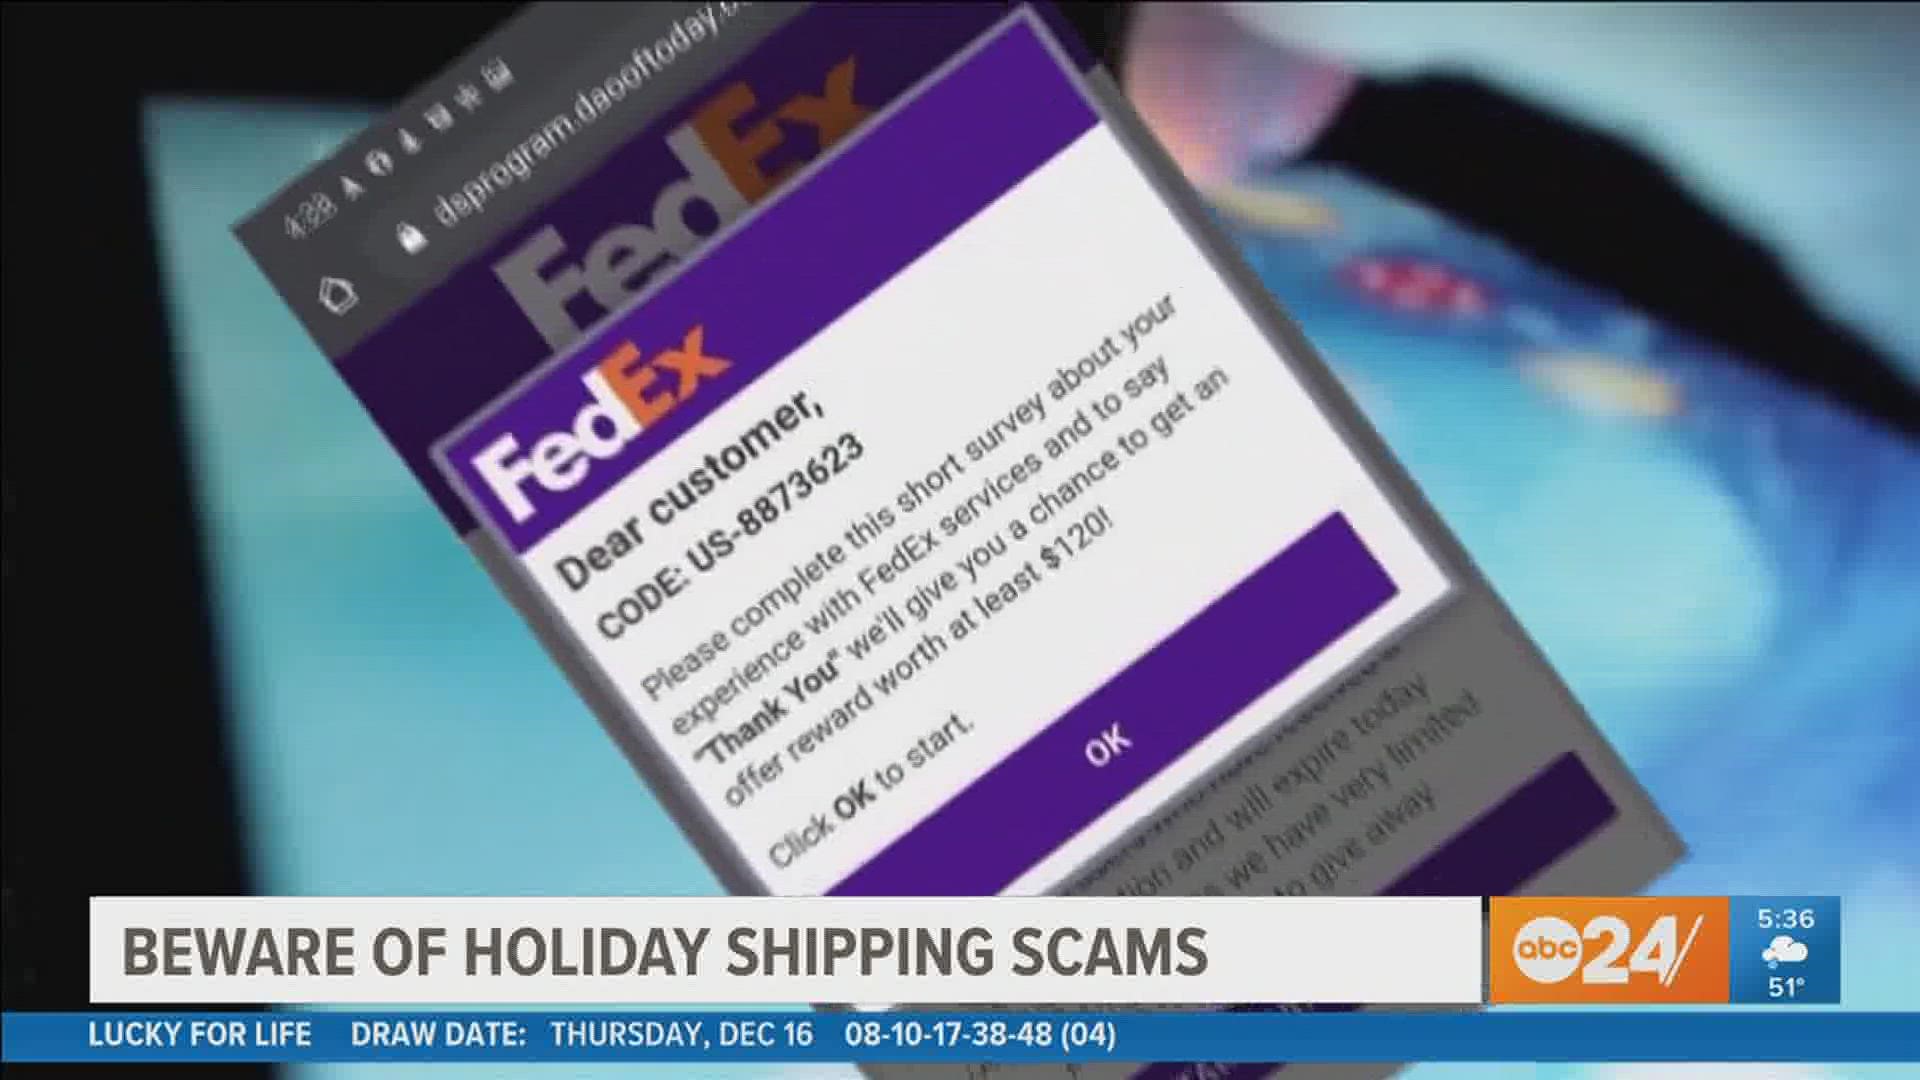 The Better Business Bureau of the Mid-South has received reports of scammers sending fake emails or texts about deliveries